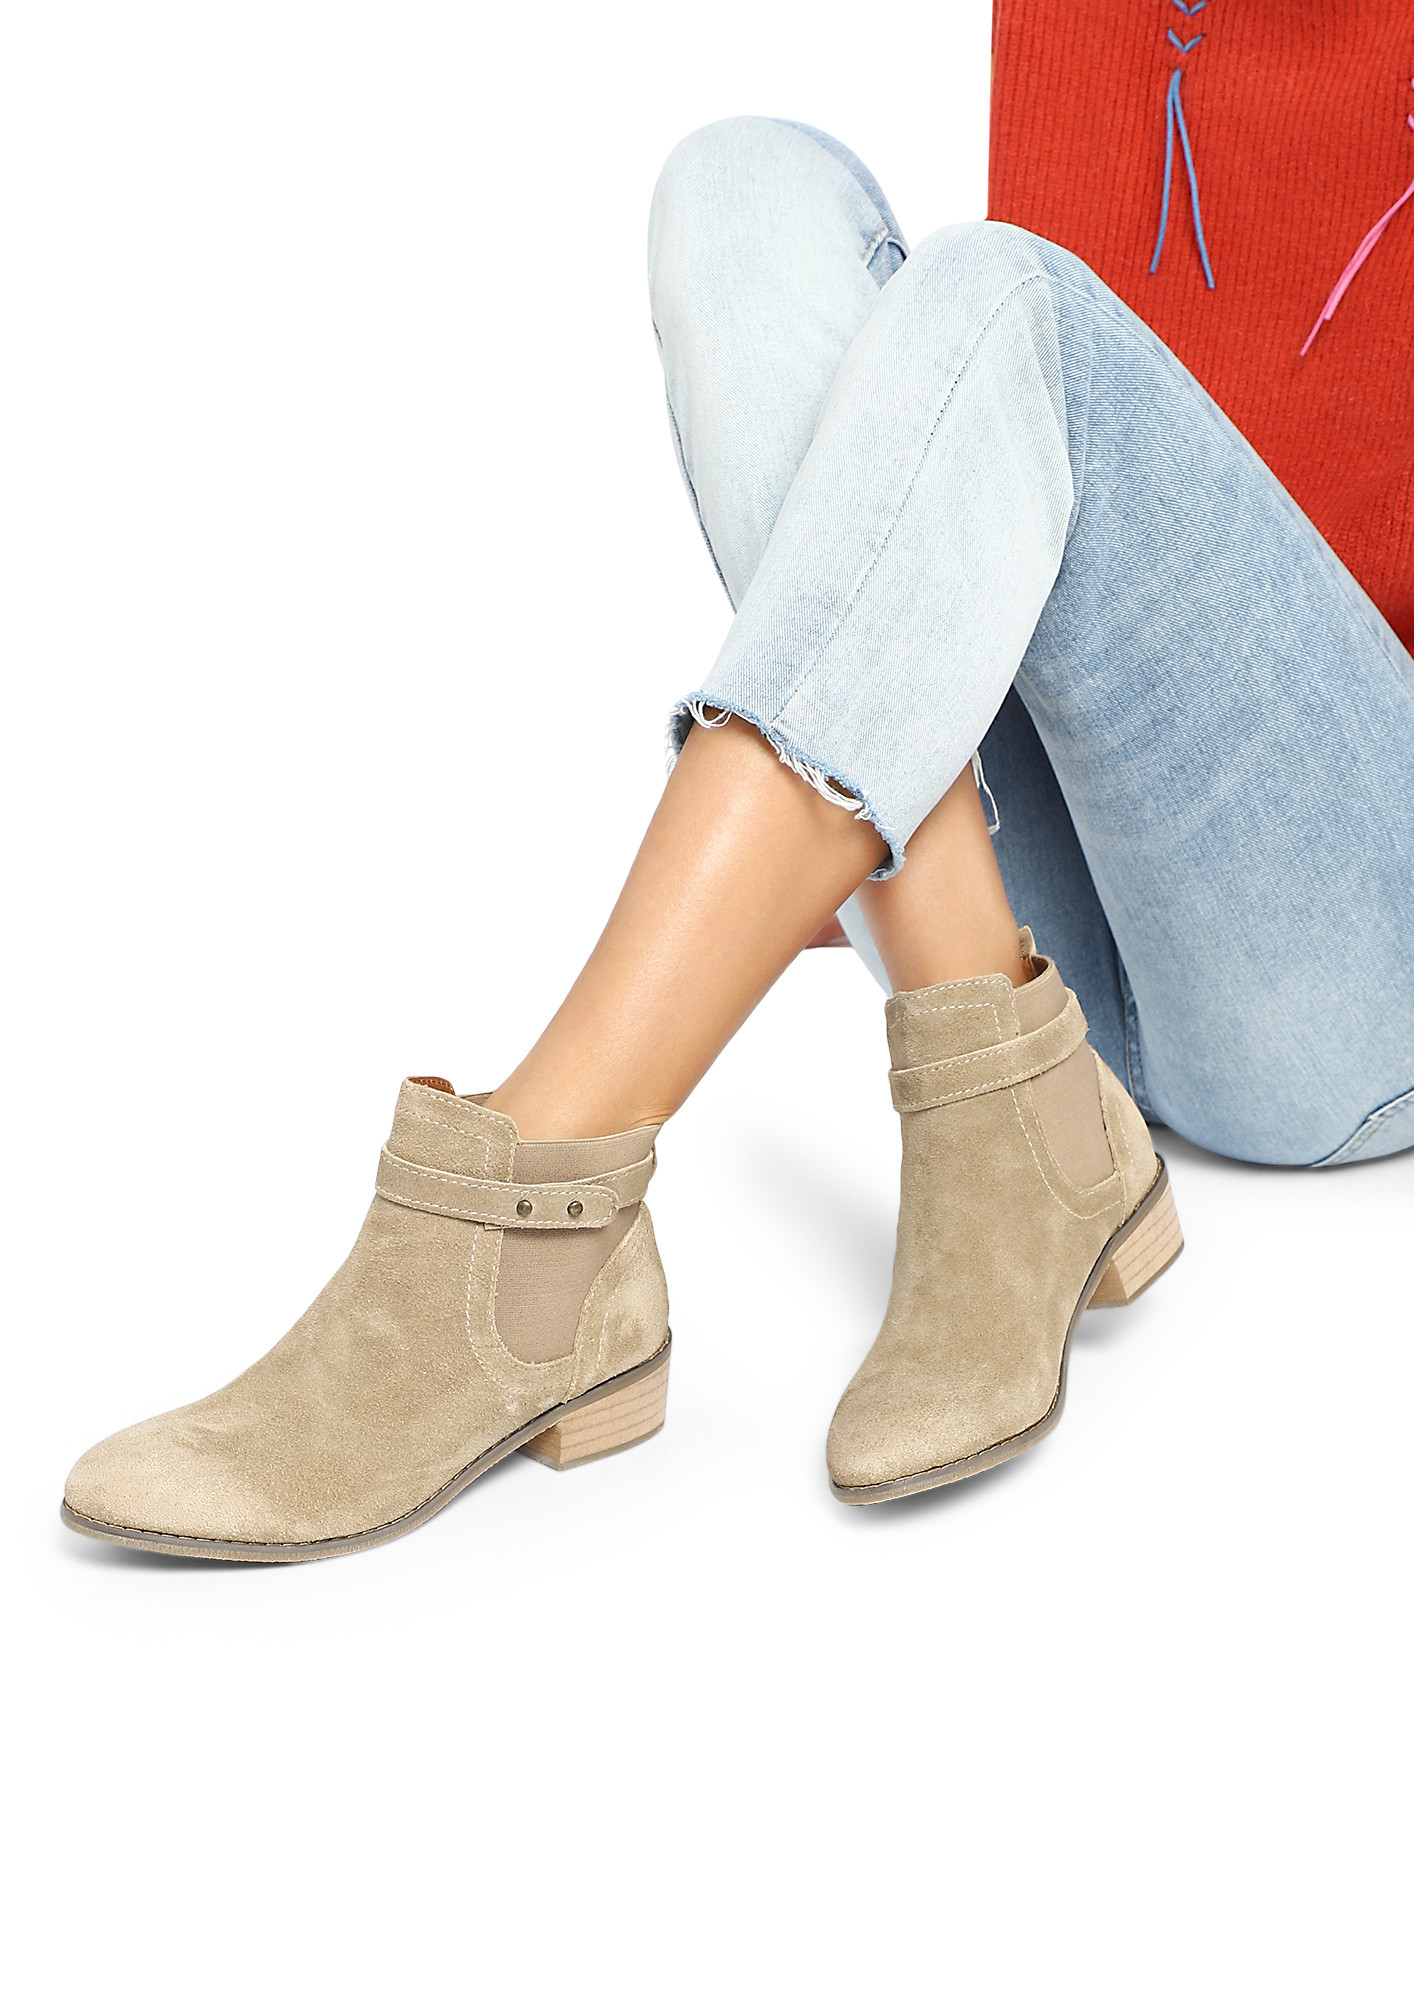 ALL OVER YOU SUEDE BEIGE ANKLE BOOTS